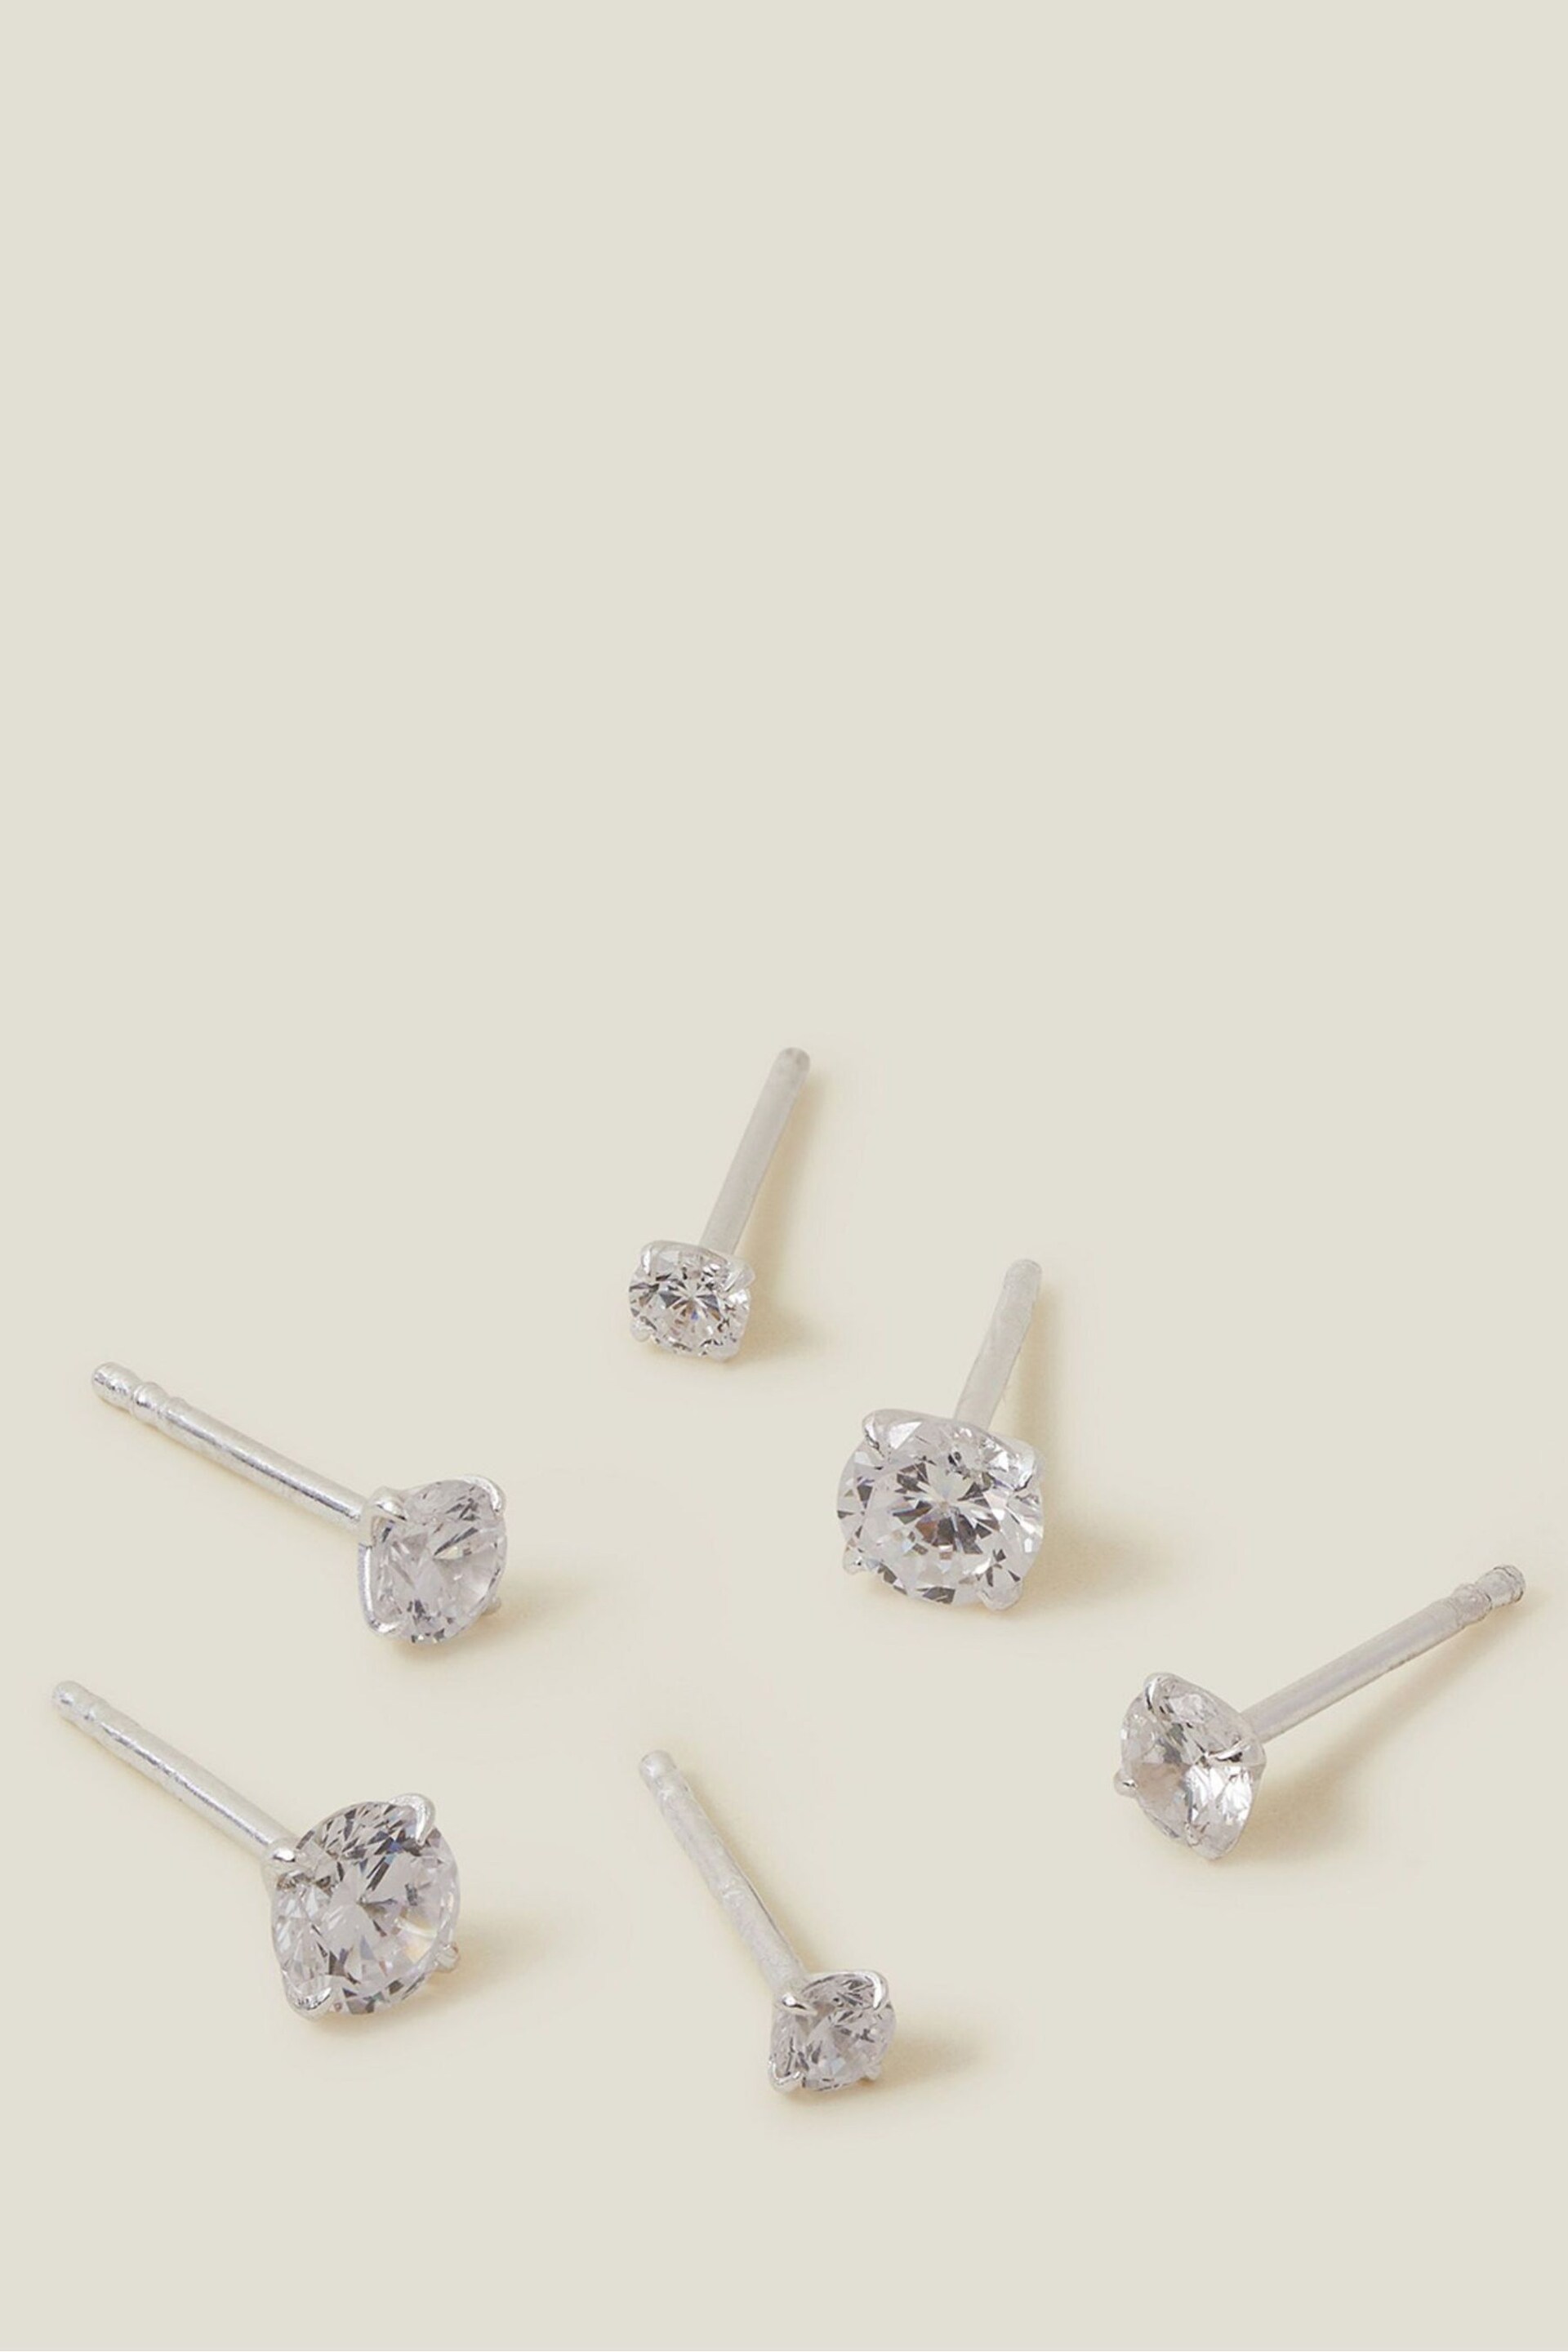 Accessorize Sterling Silver Plated Crystal Studs Earrings 3 Pack - Image 1 of 2